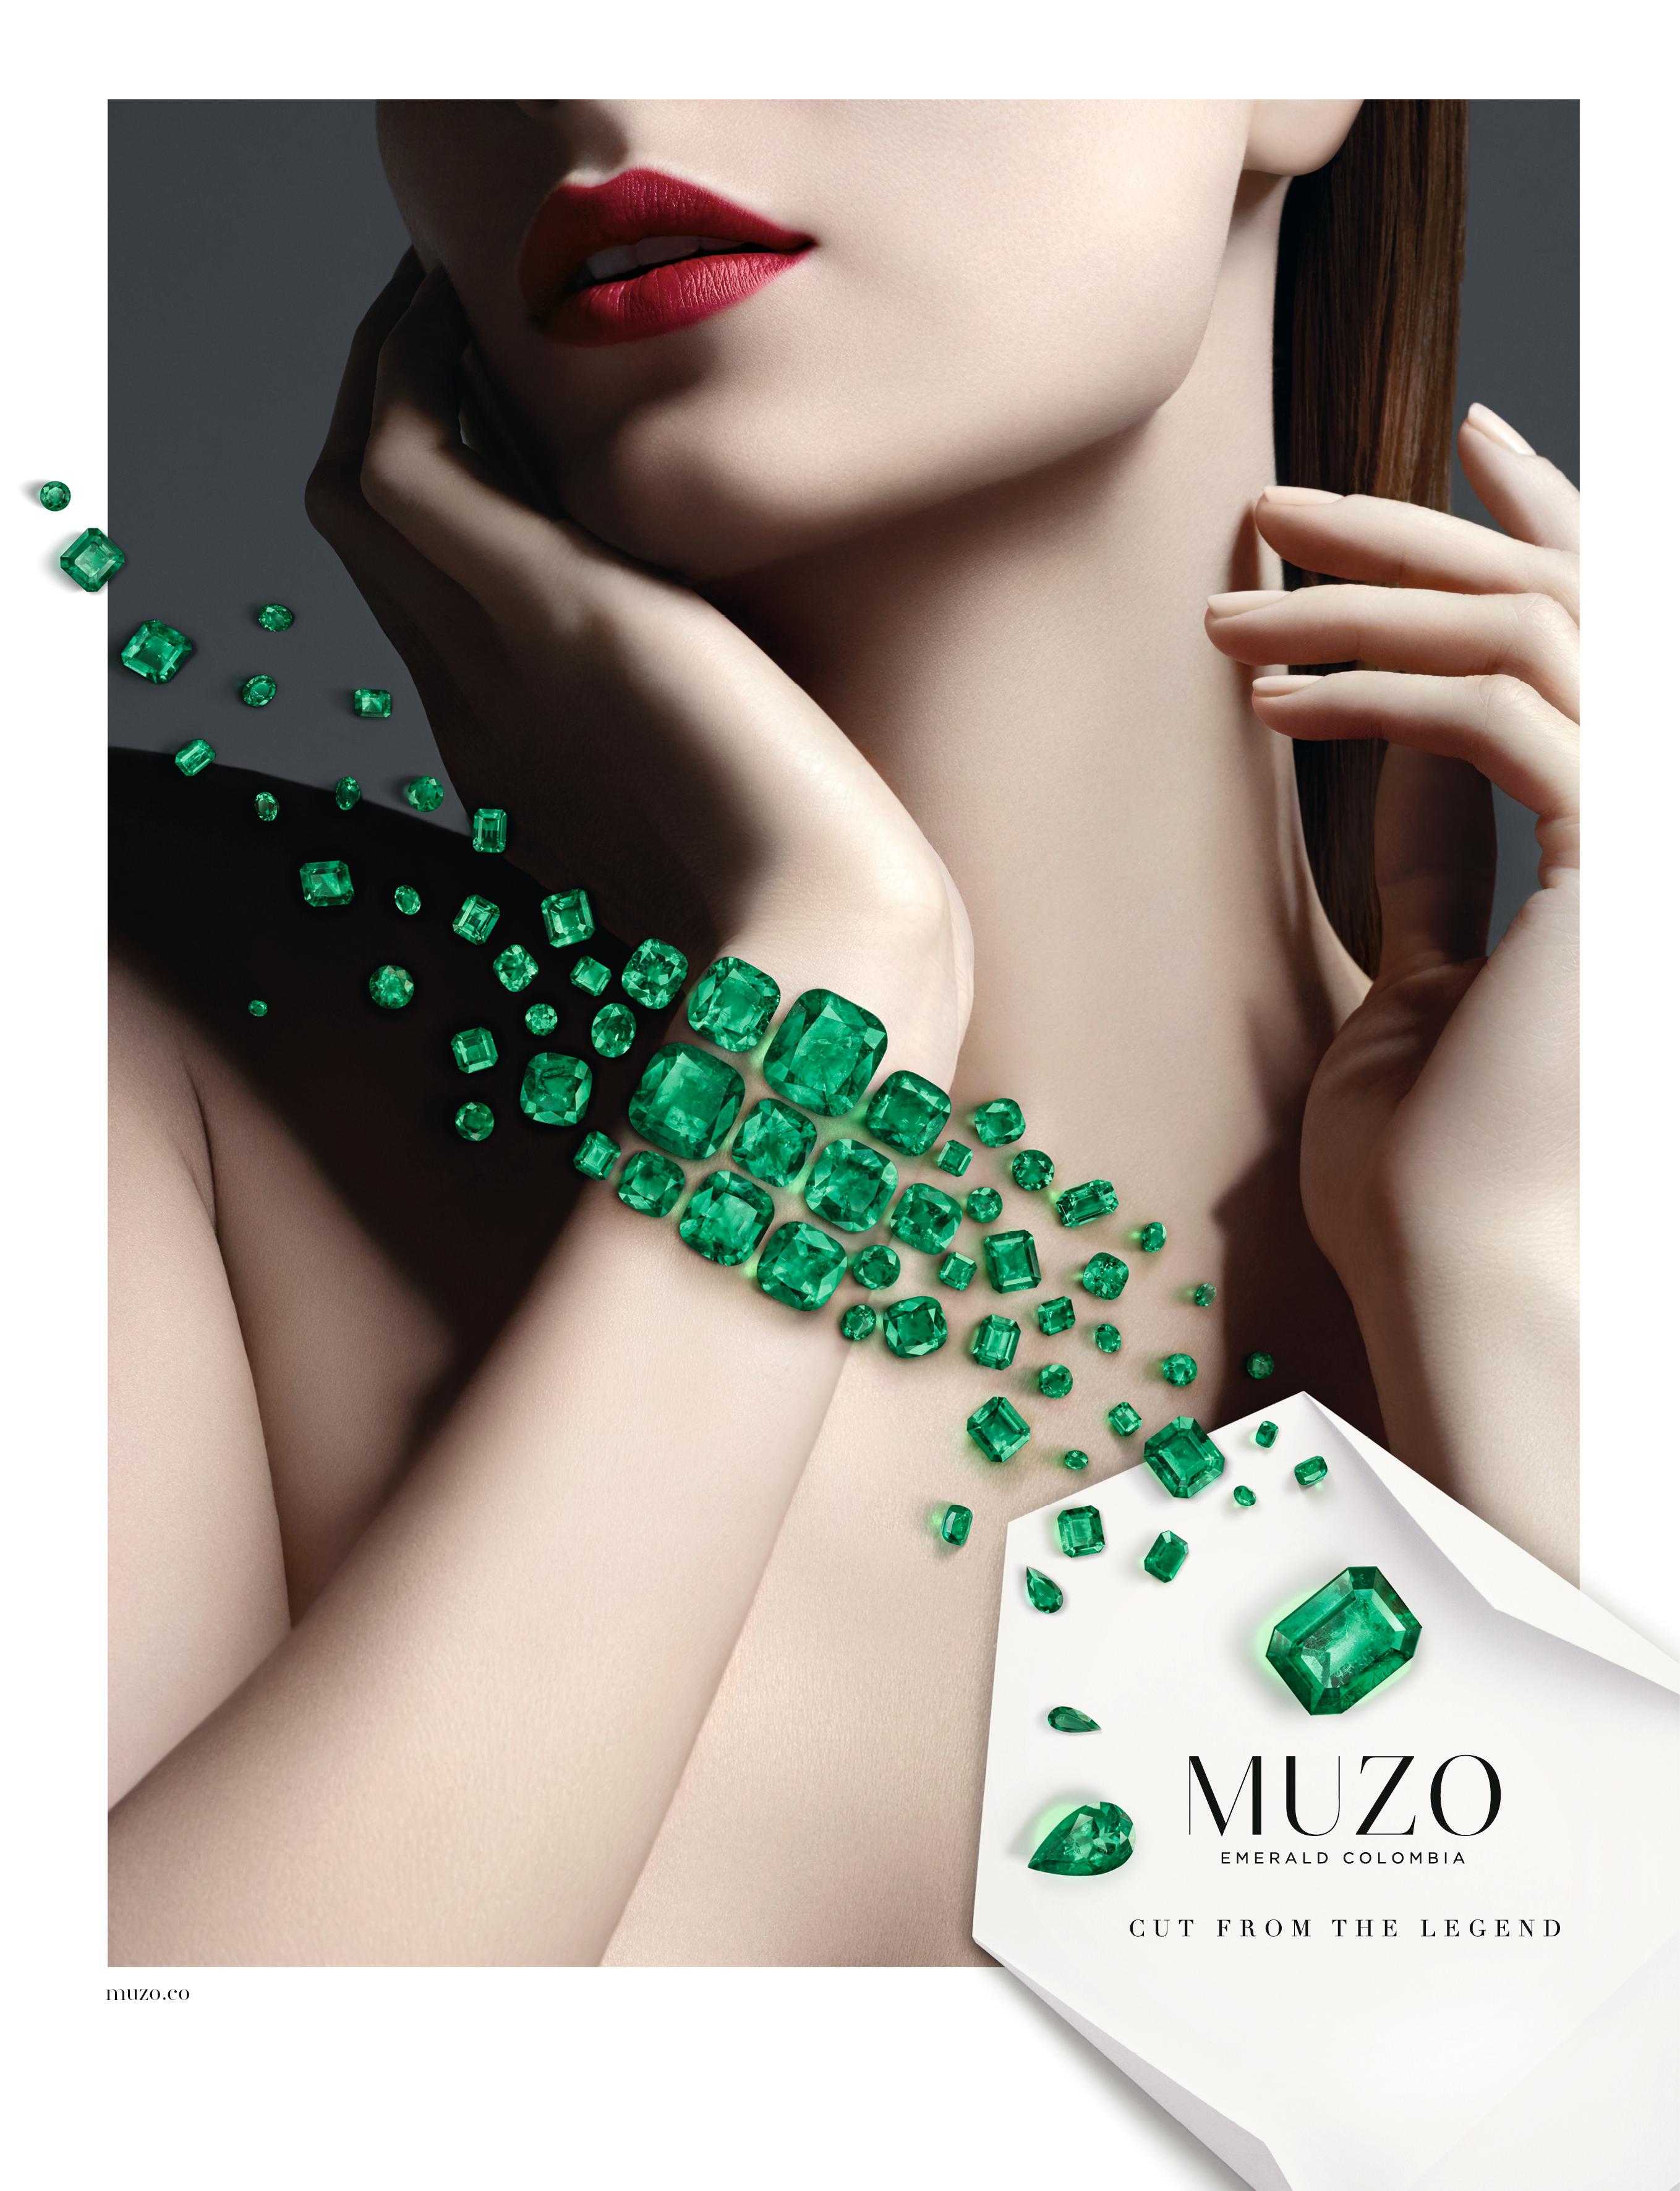 One of a kind classic 2 row bracelet featuring light and dark tone Colombian emeralds weighing 111.57 carats accented by 2 carats of diamonds.

Muzo Emerald Colombia Heritage Muisca Bracelet set with 111.57 carats Emerald.

Named in honor of the